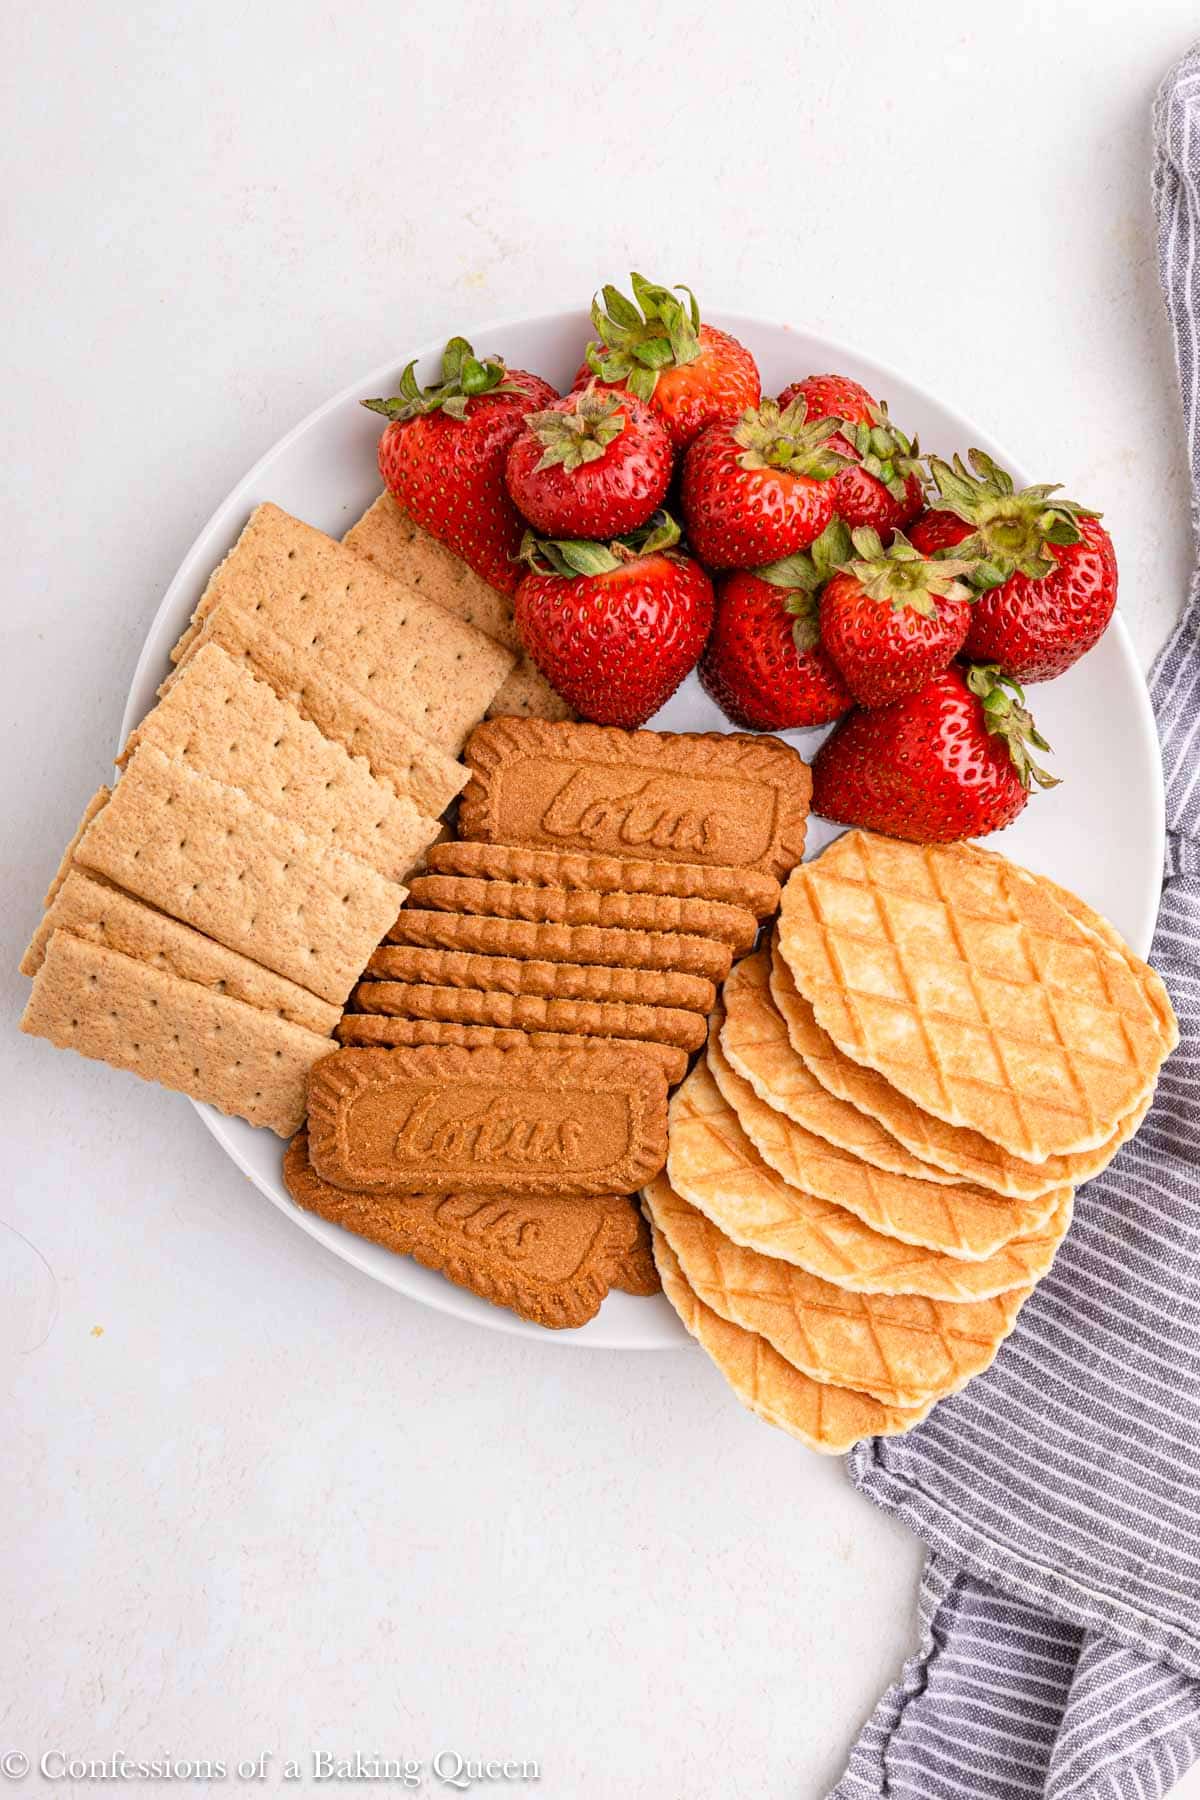 graham crackers, biscuits and strawberries on a white plate on a light surface with a blue linen